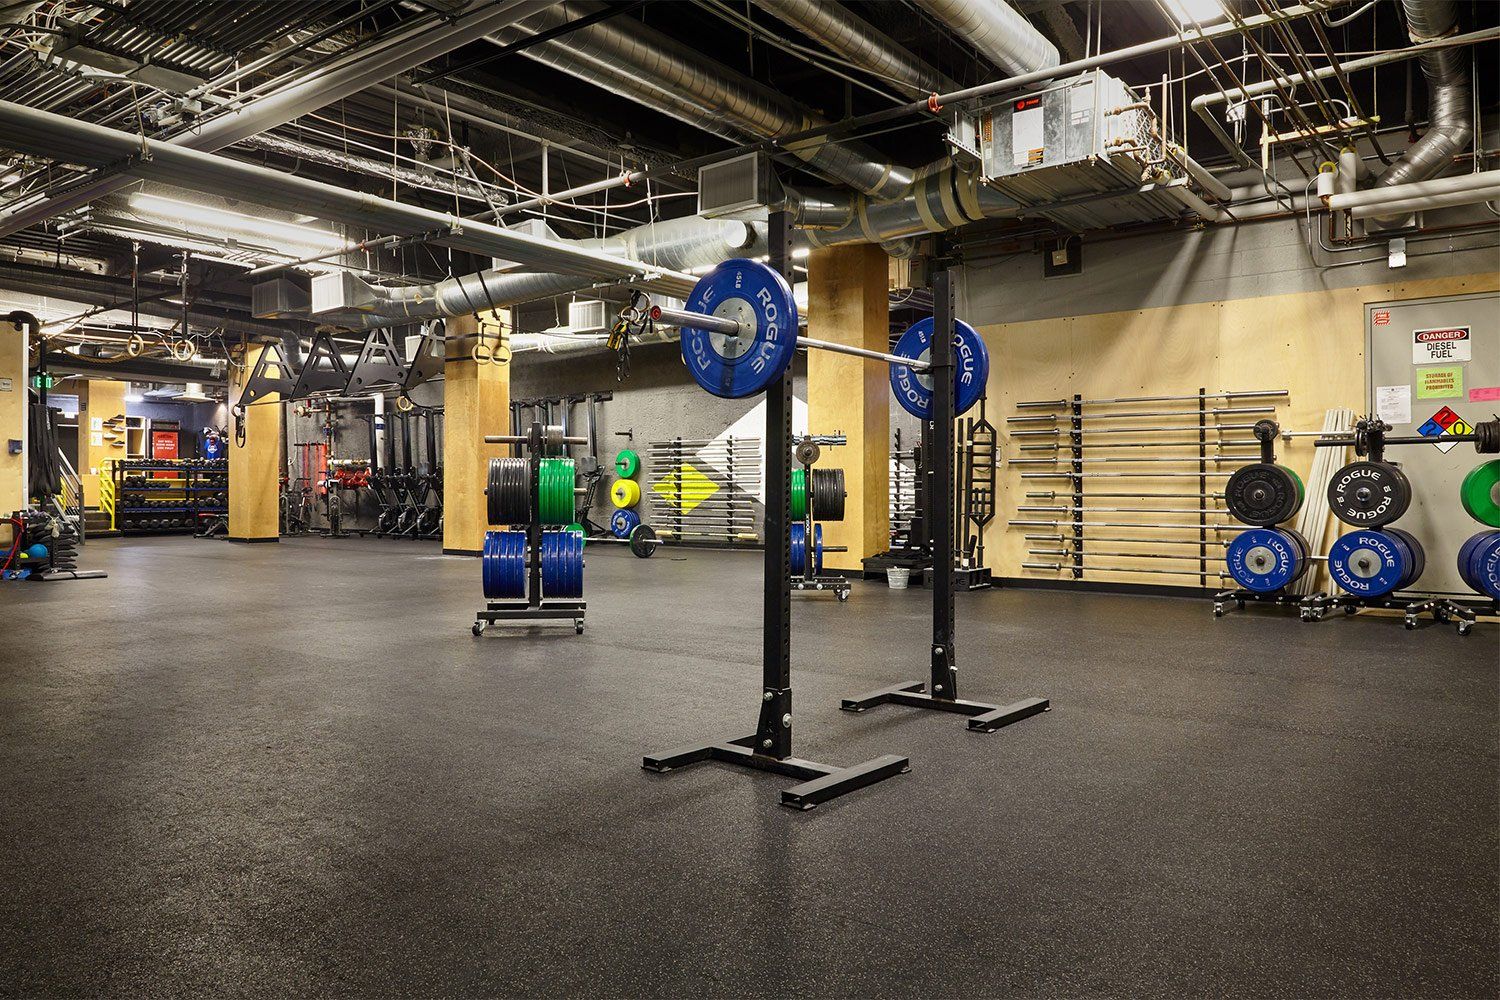 Fitness Clubs and Gyms in Downtown San Francisco